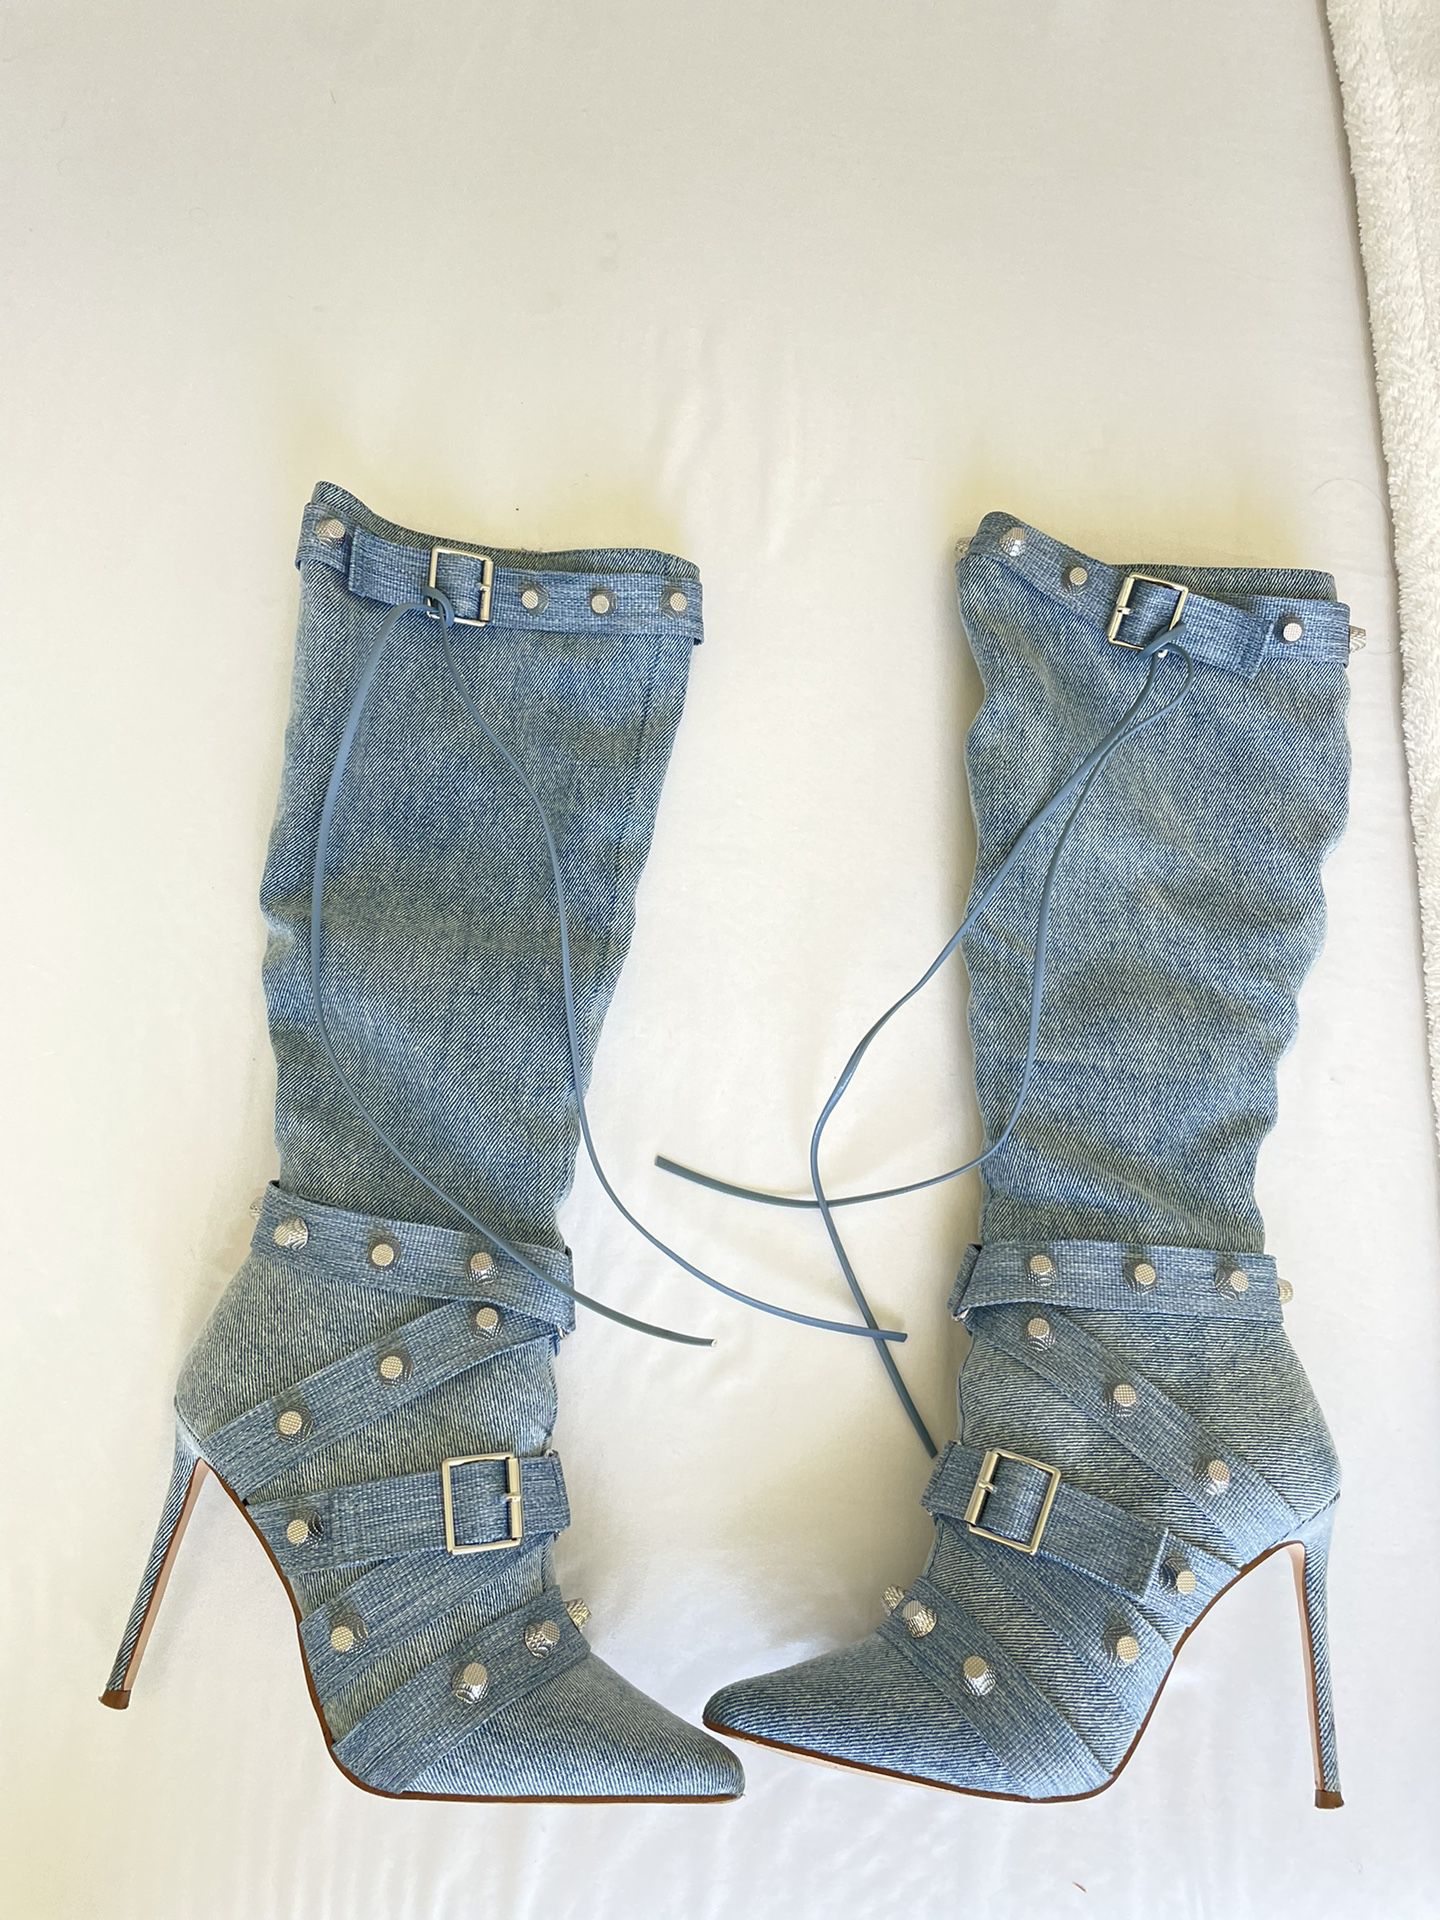 Denim High Boots From Aldo Only Used Once 